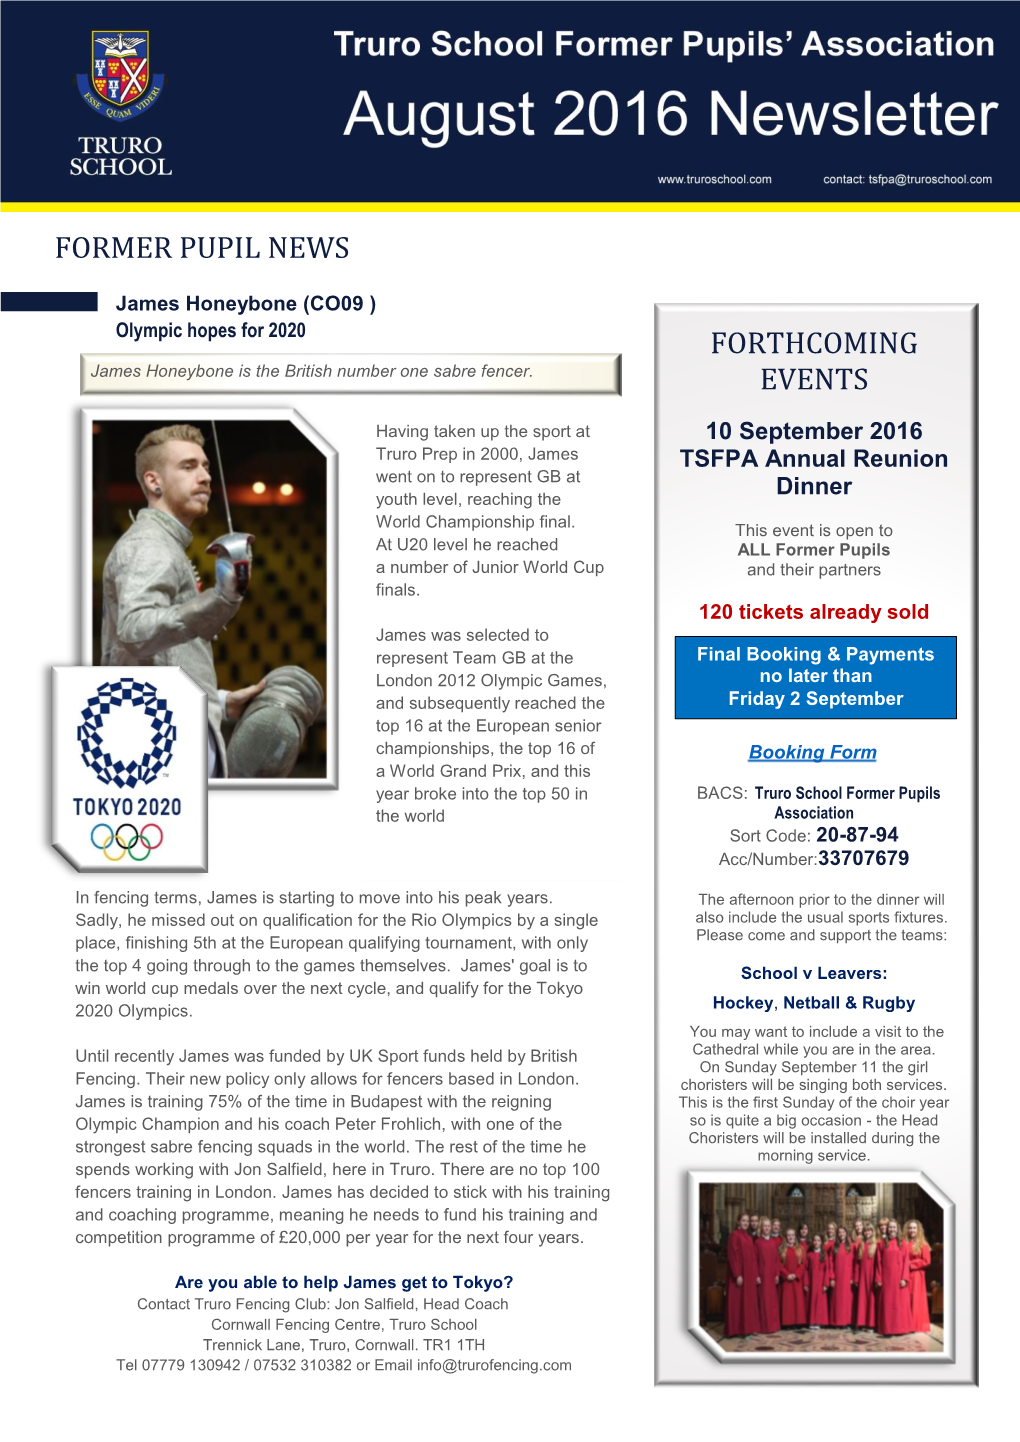 Forthcoming Events Former Pupil News